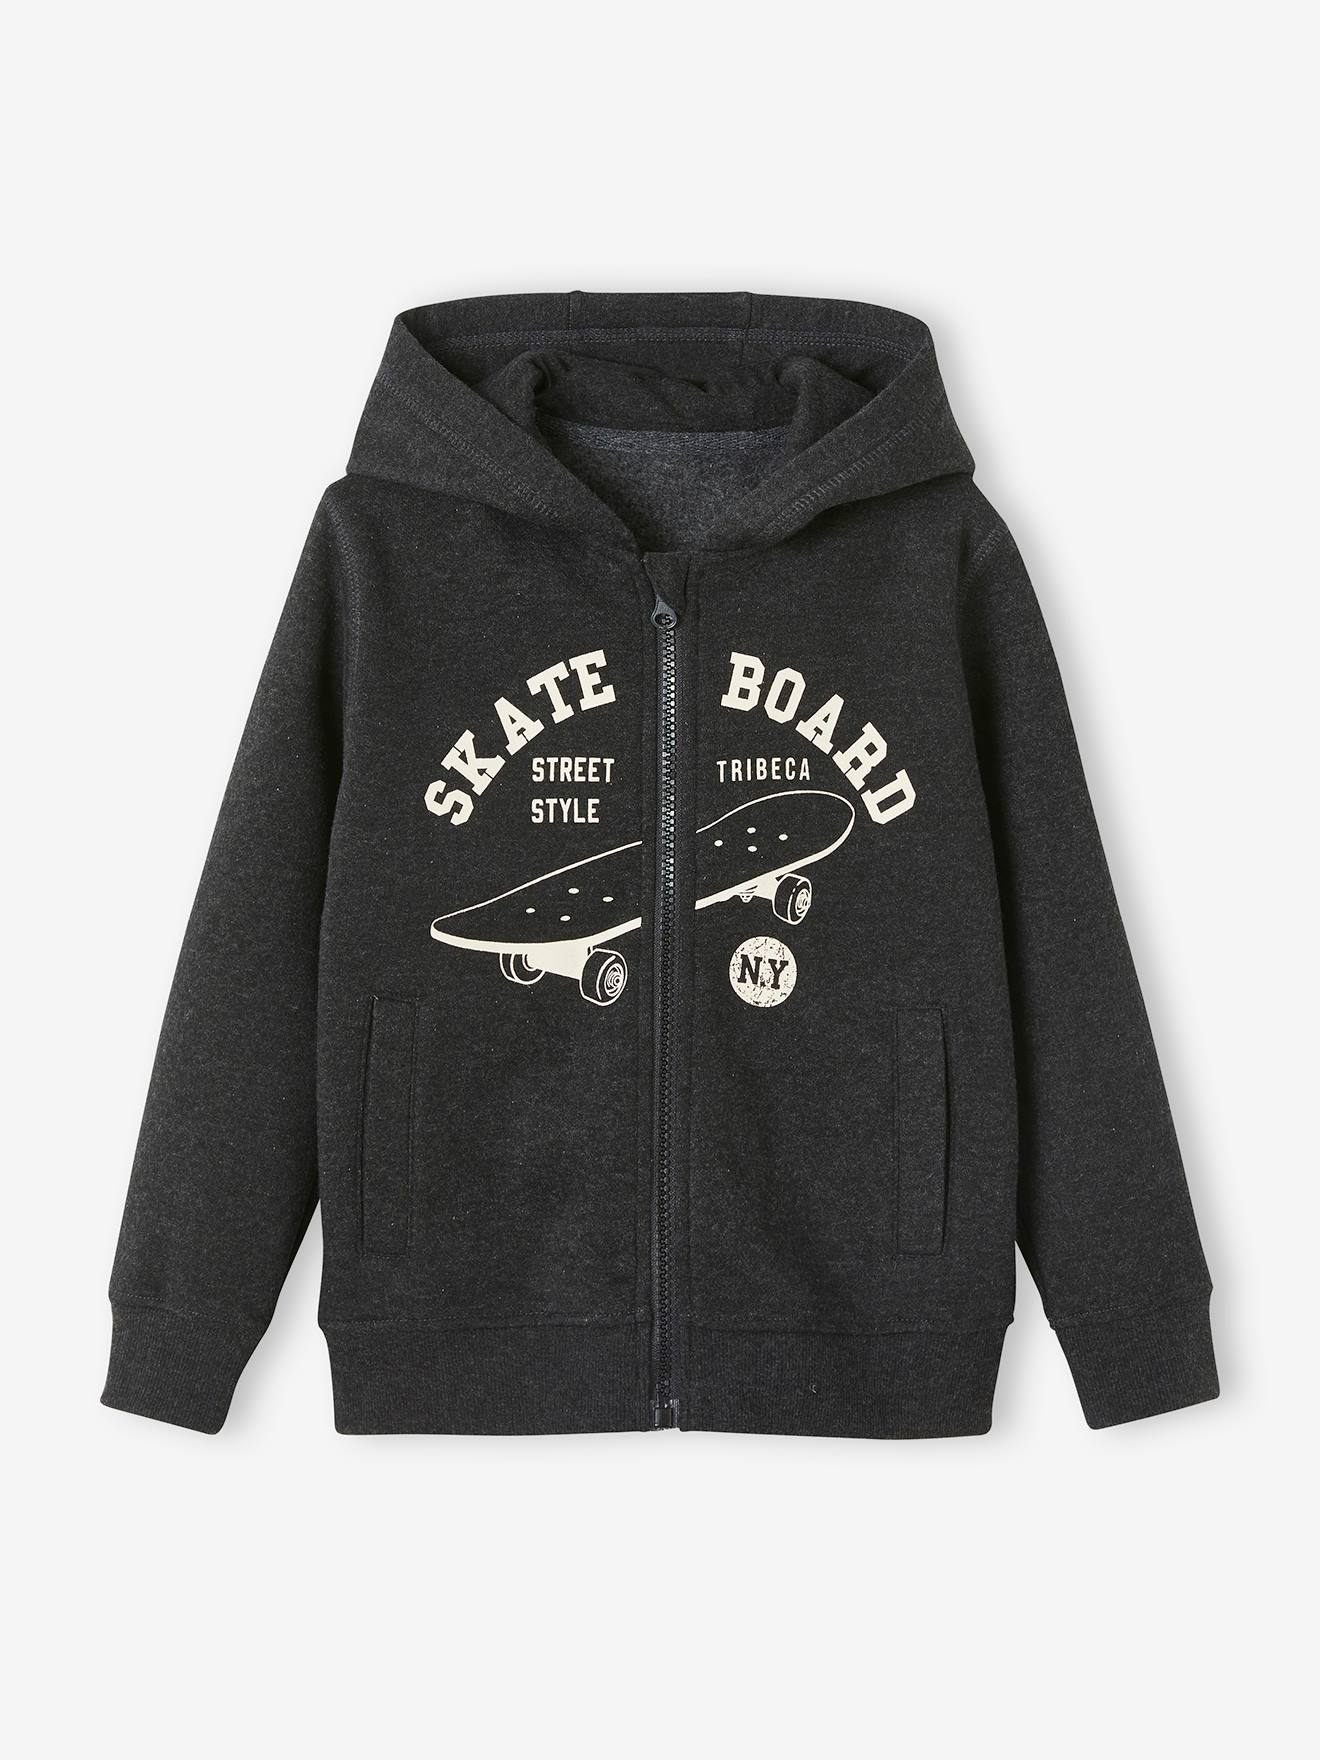 Zipped Jacket with Hood, Skateboard Motif, for Boys black dark mixed color